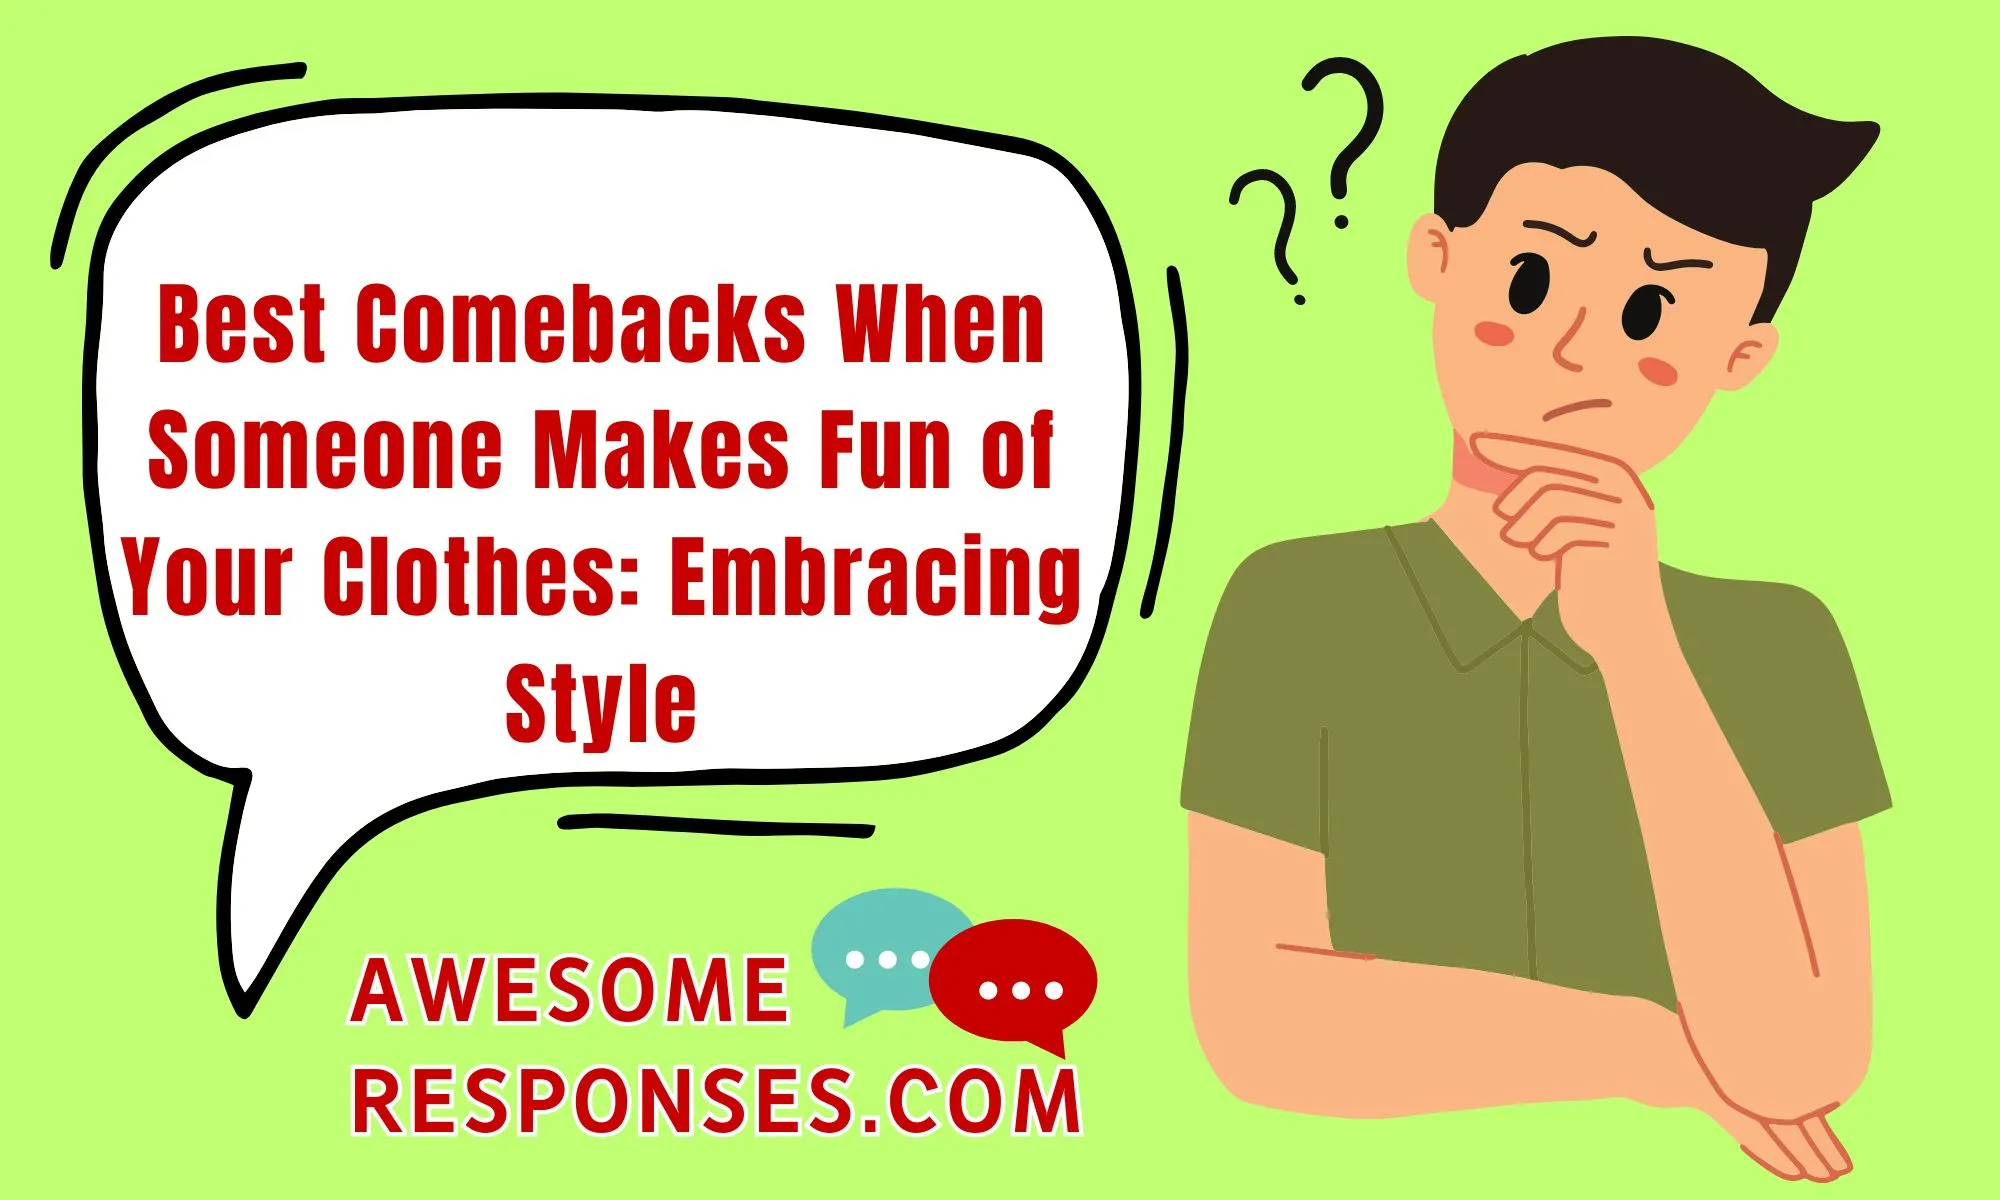 25 Best Comebacks When Someone Makes Fun of Your Clothes : Embracing Style